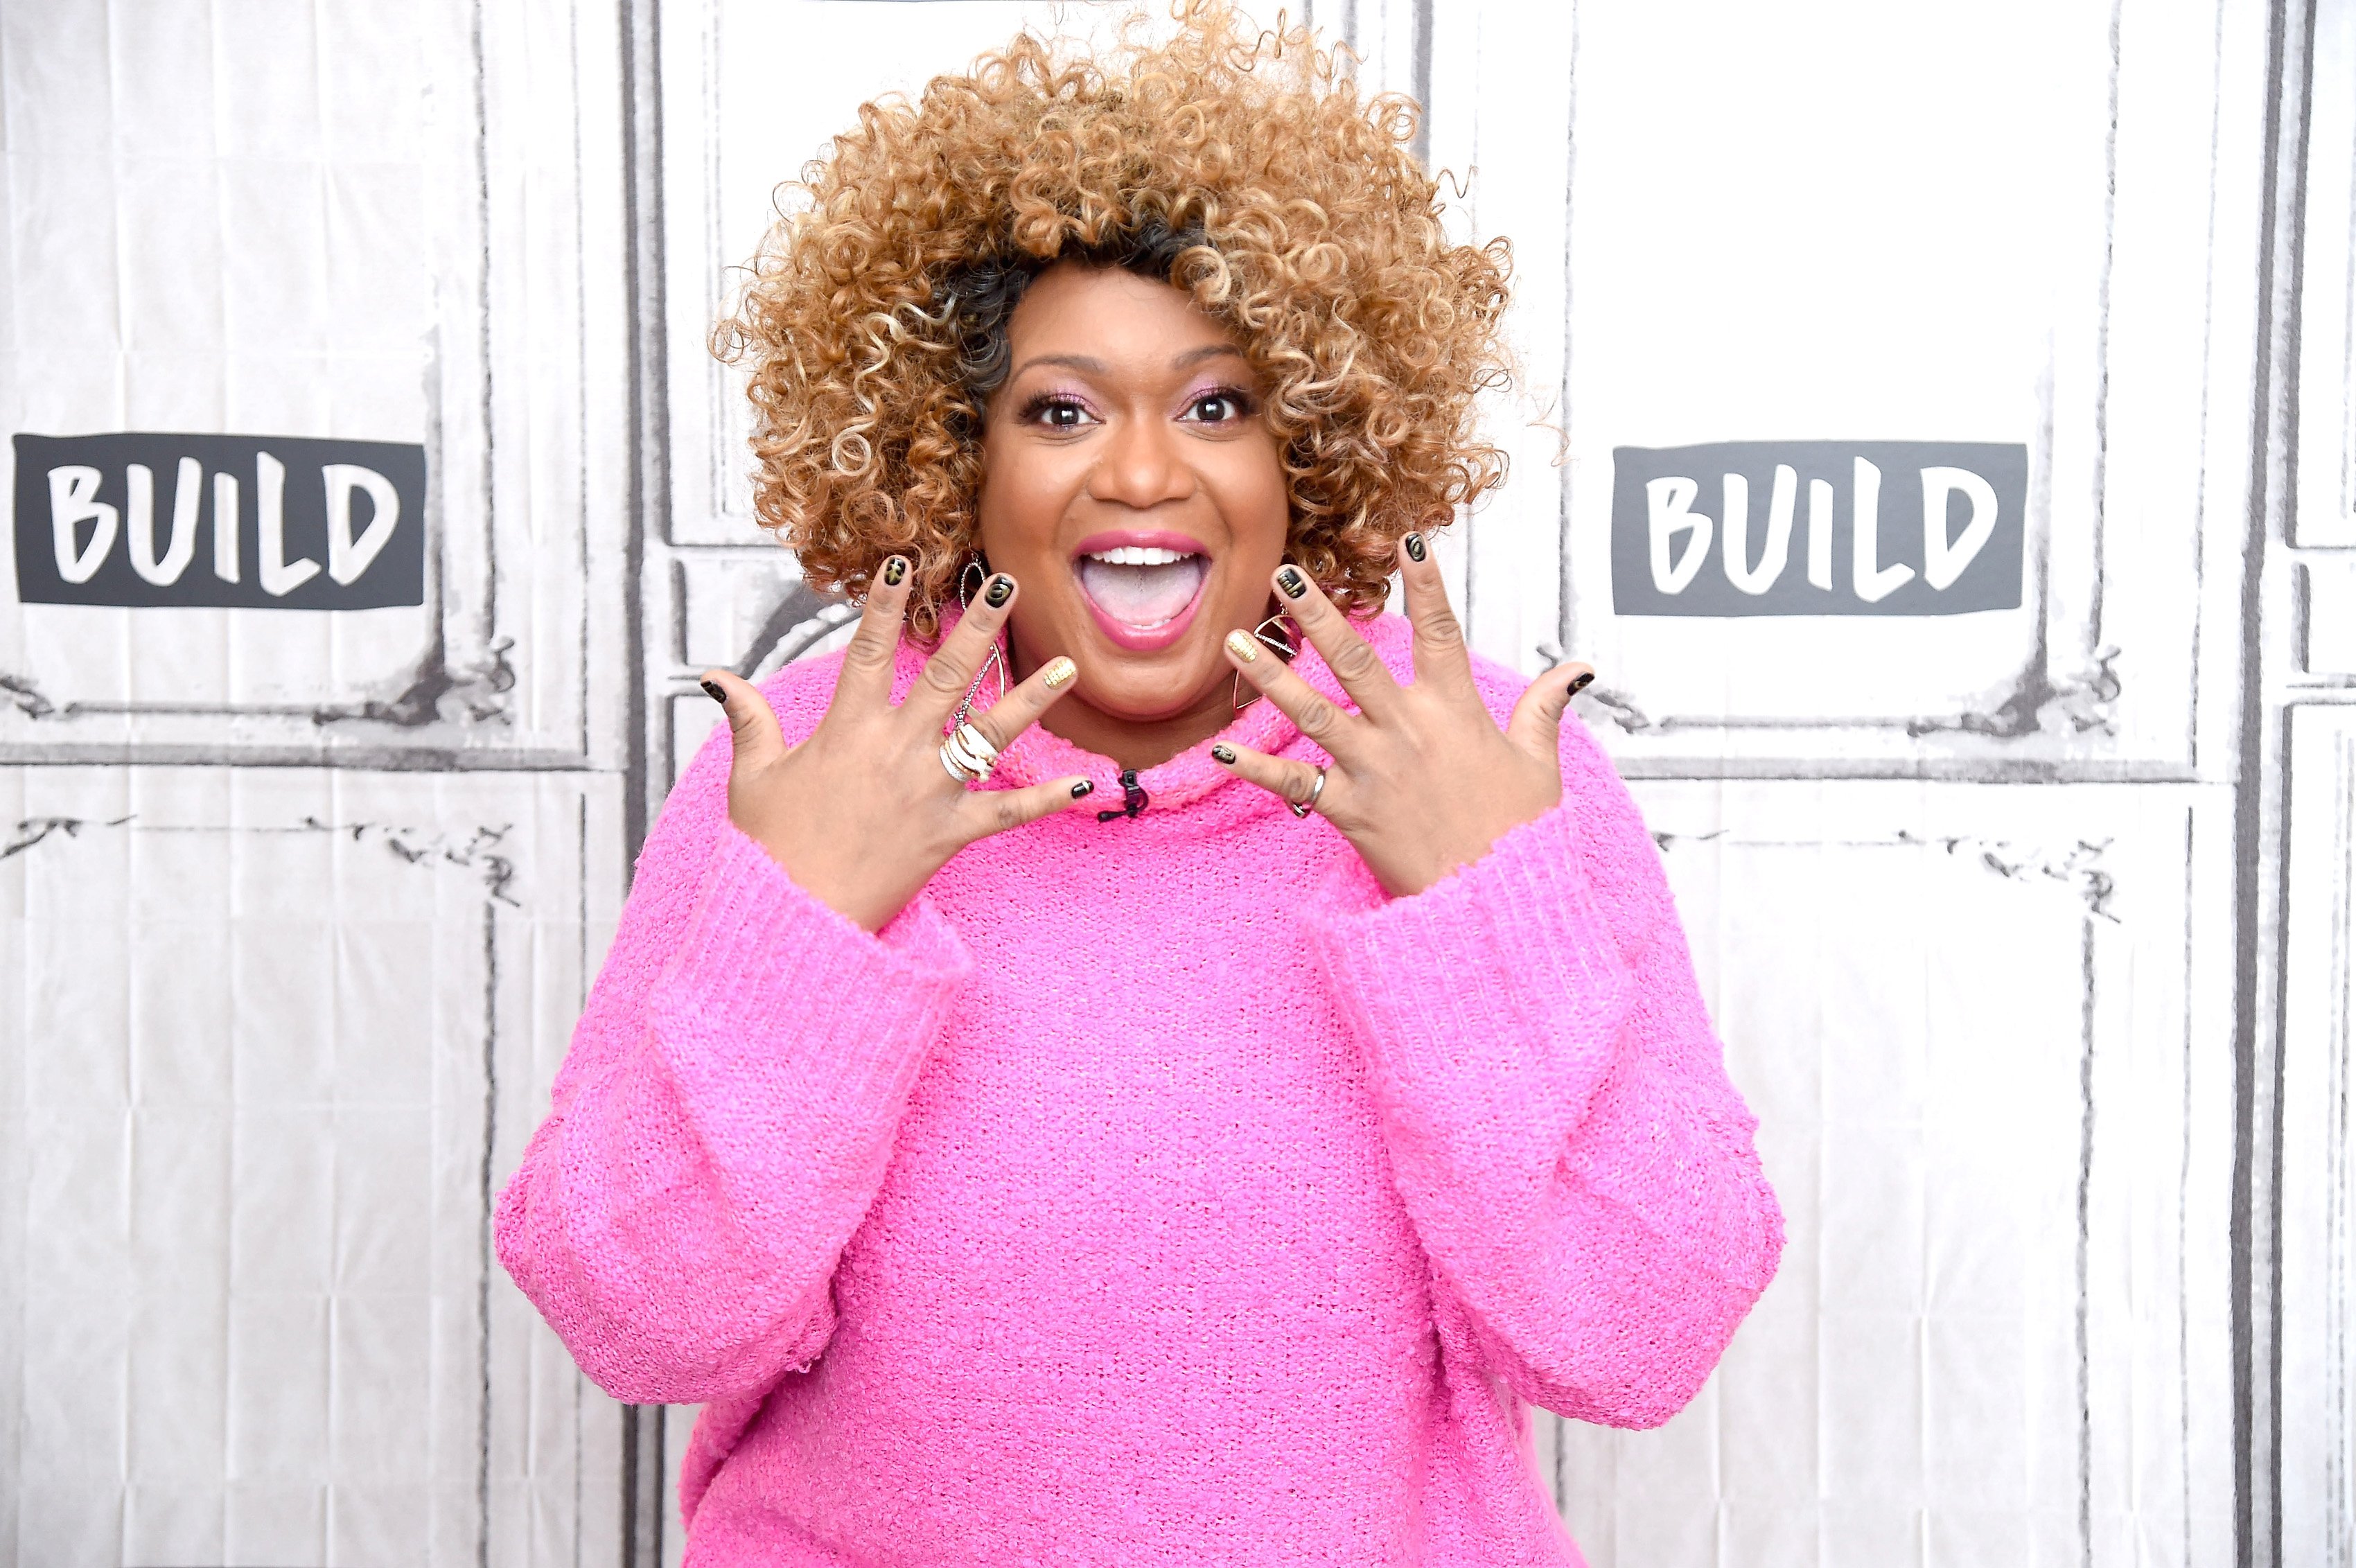 Sunny Anderson excited and showing off her finger nails and rings